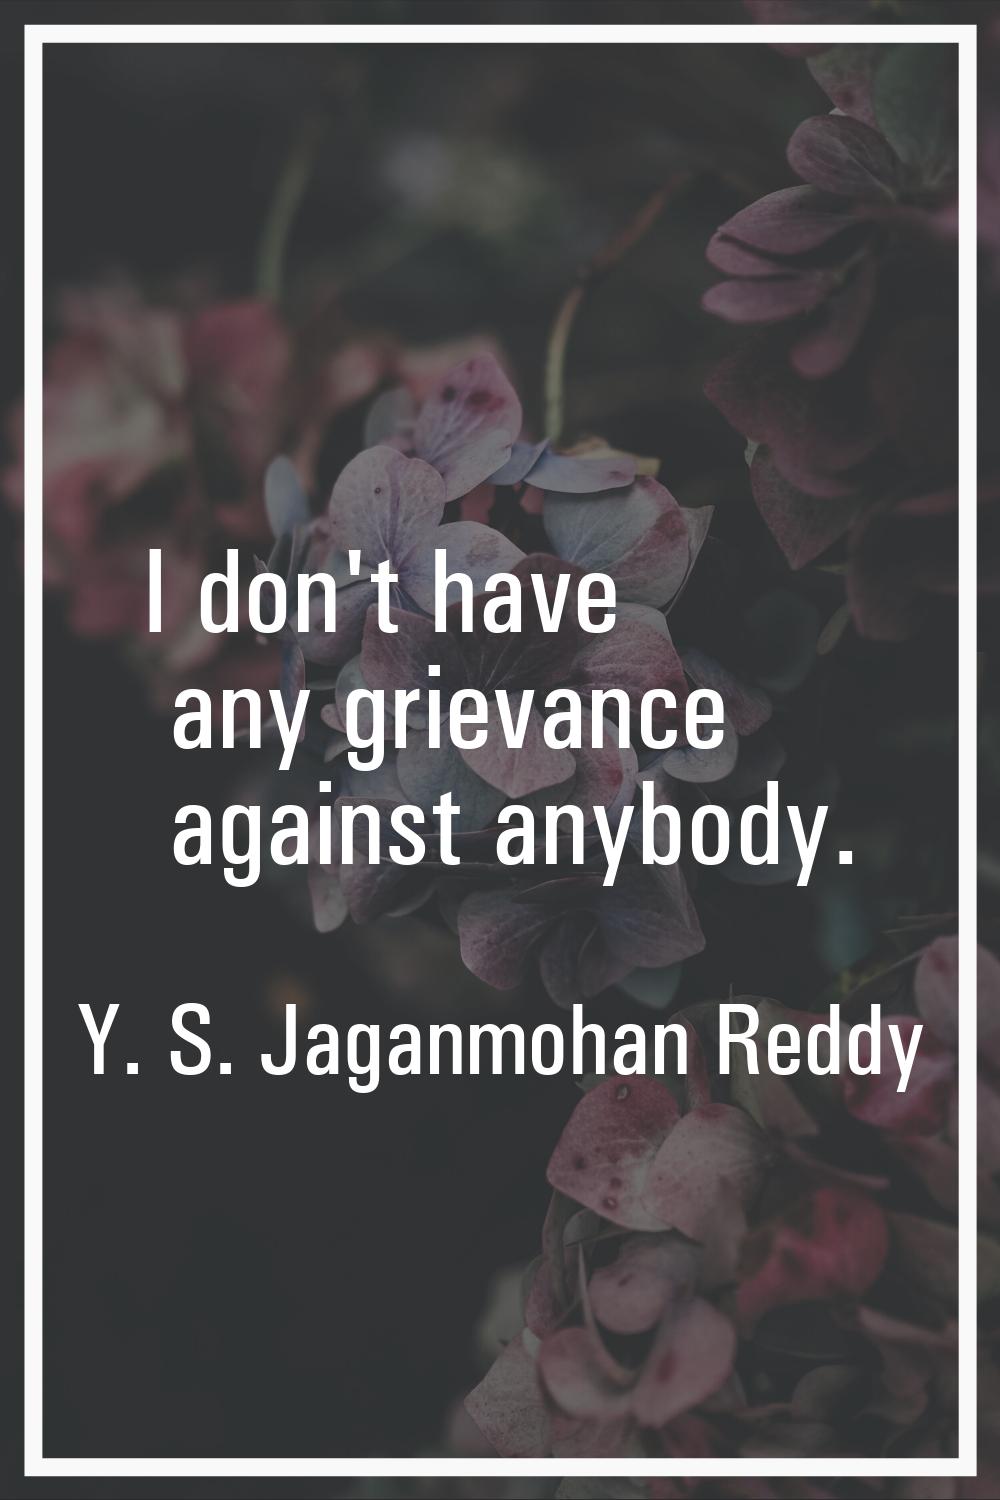 I don't have any grievance against anybody.